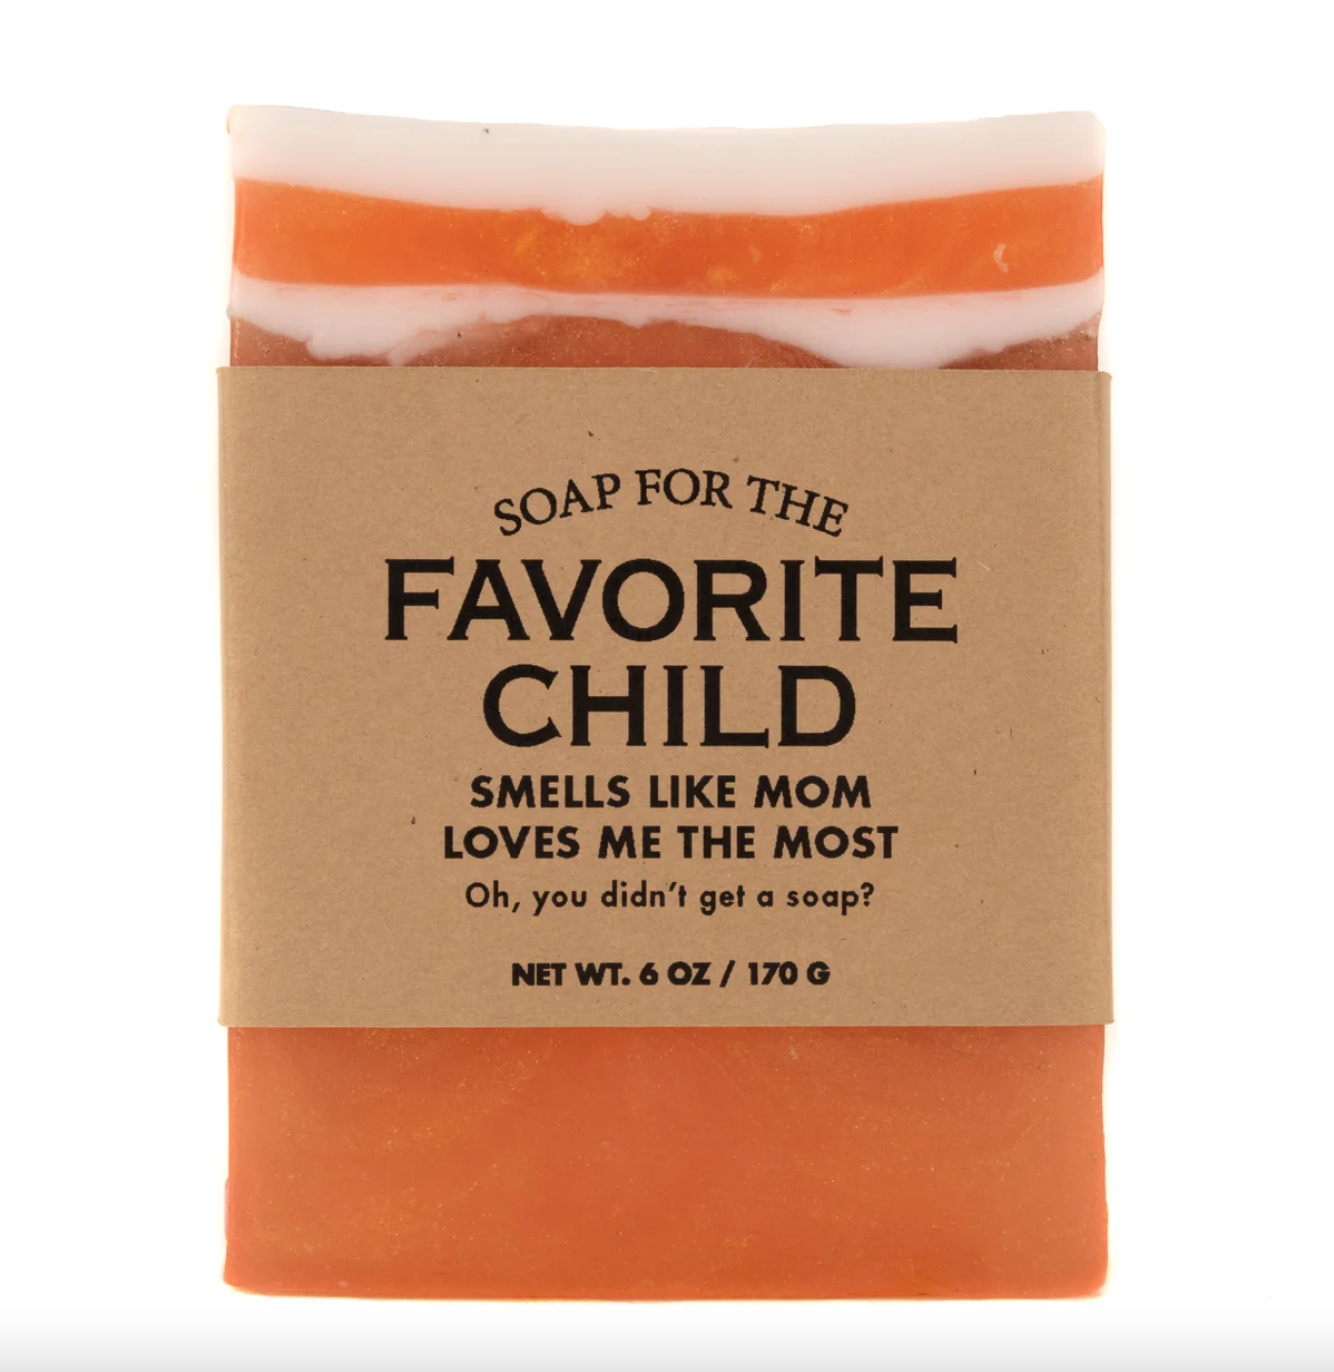 Soap for the Favorite Child - Heart of the Home LV